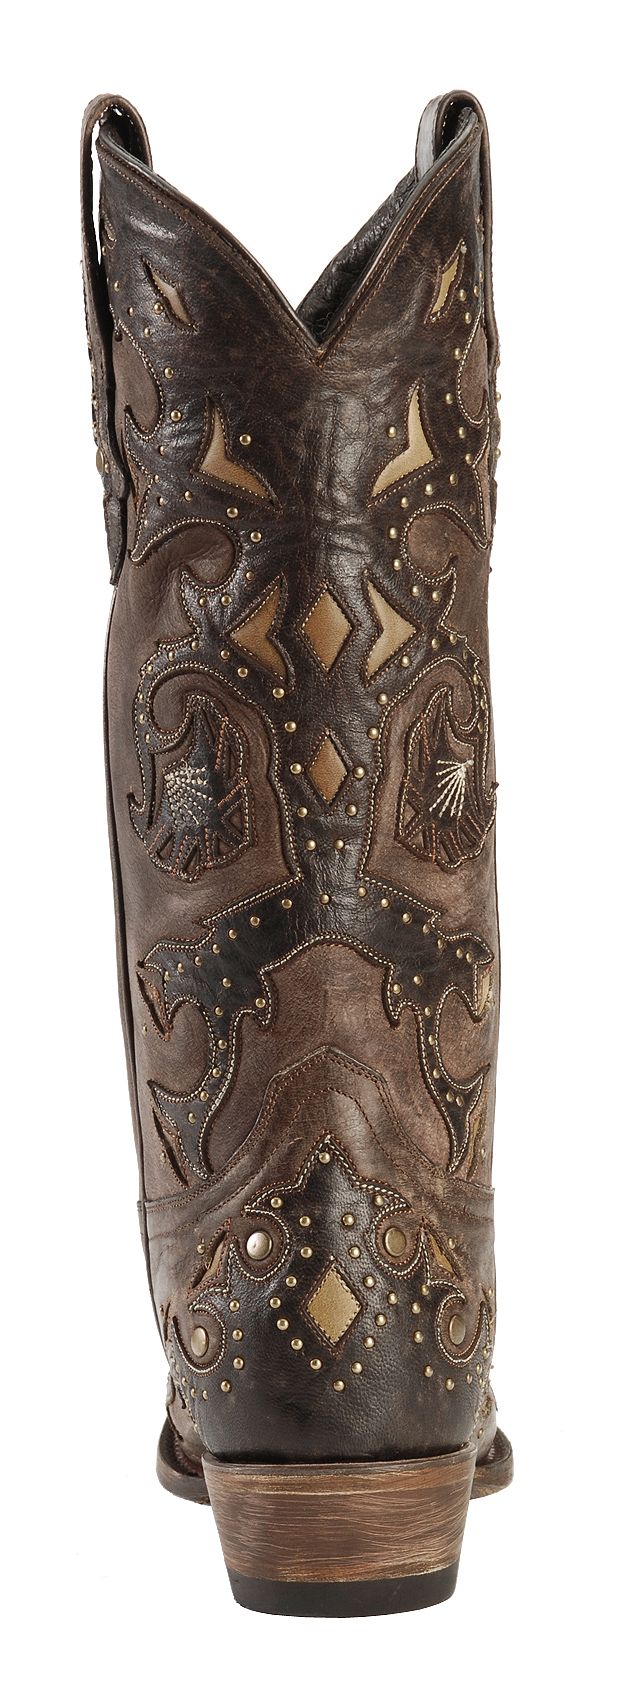 Lucchese Handmade 1883 Studded Fiona Cowgirl Boots - Snip Toe | Sheplers